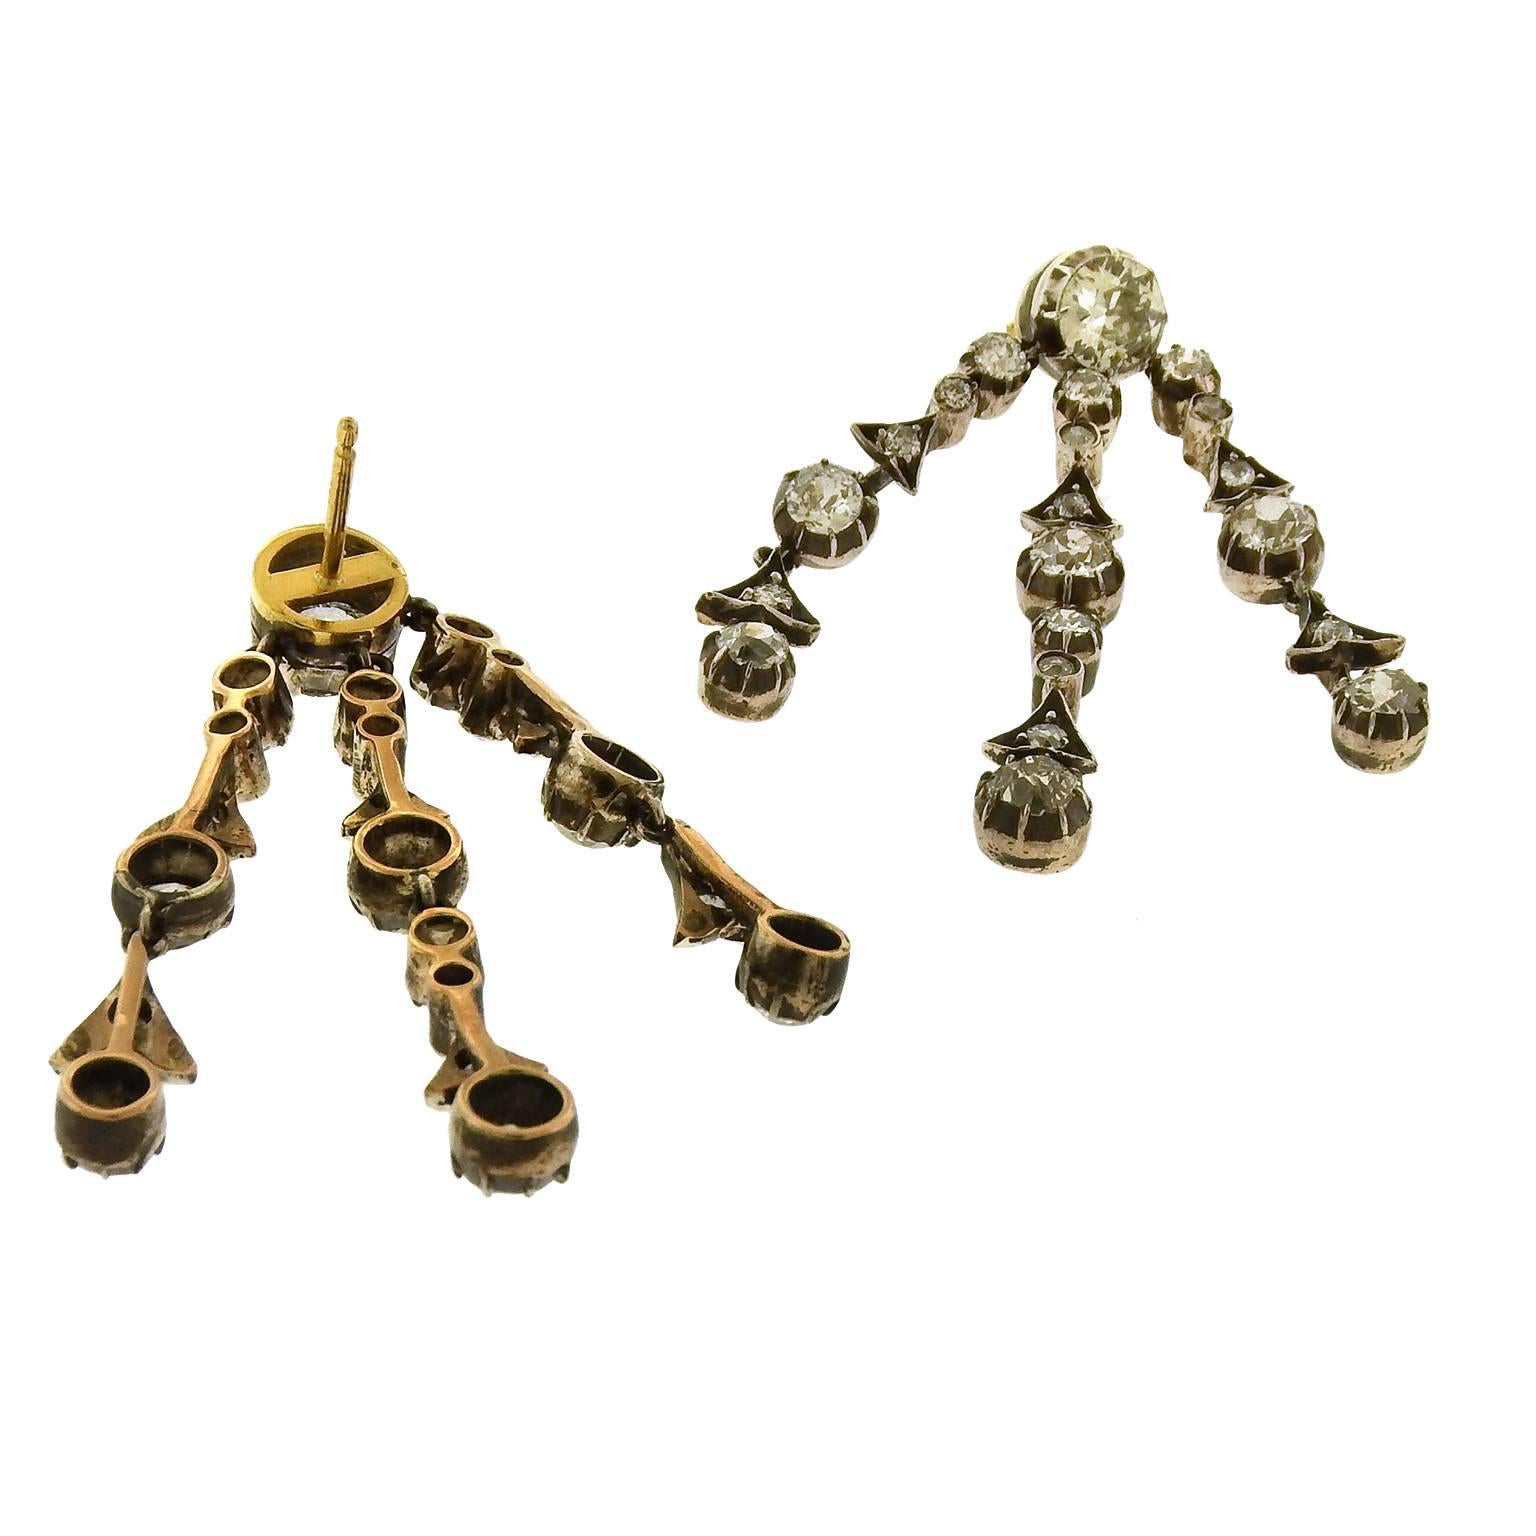 Antique Edwardian diamond drop earrings are set with approx. 7.50 carats diamonds in silver-topped gold alternating round and triangular segments, gold posts. Earrings measure 1-1/2